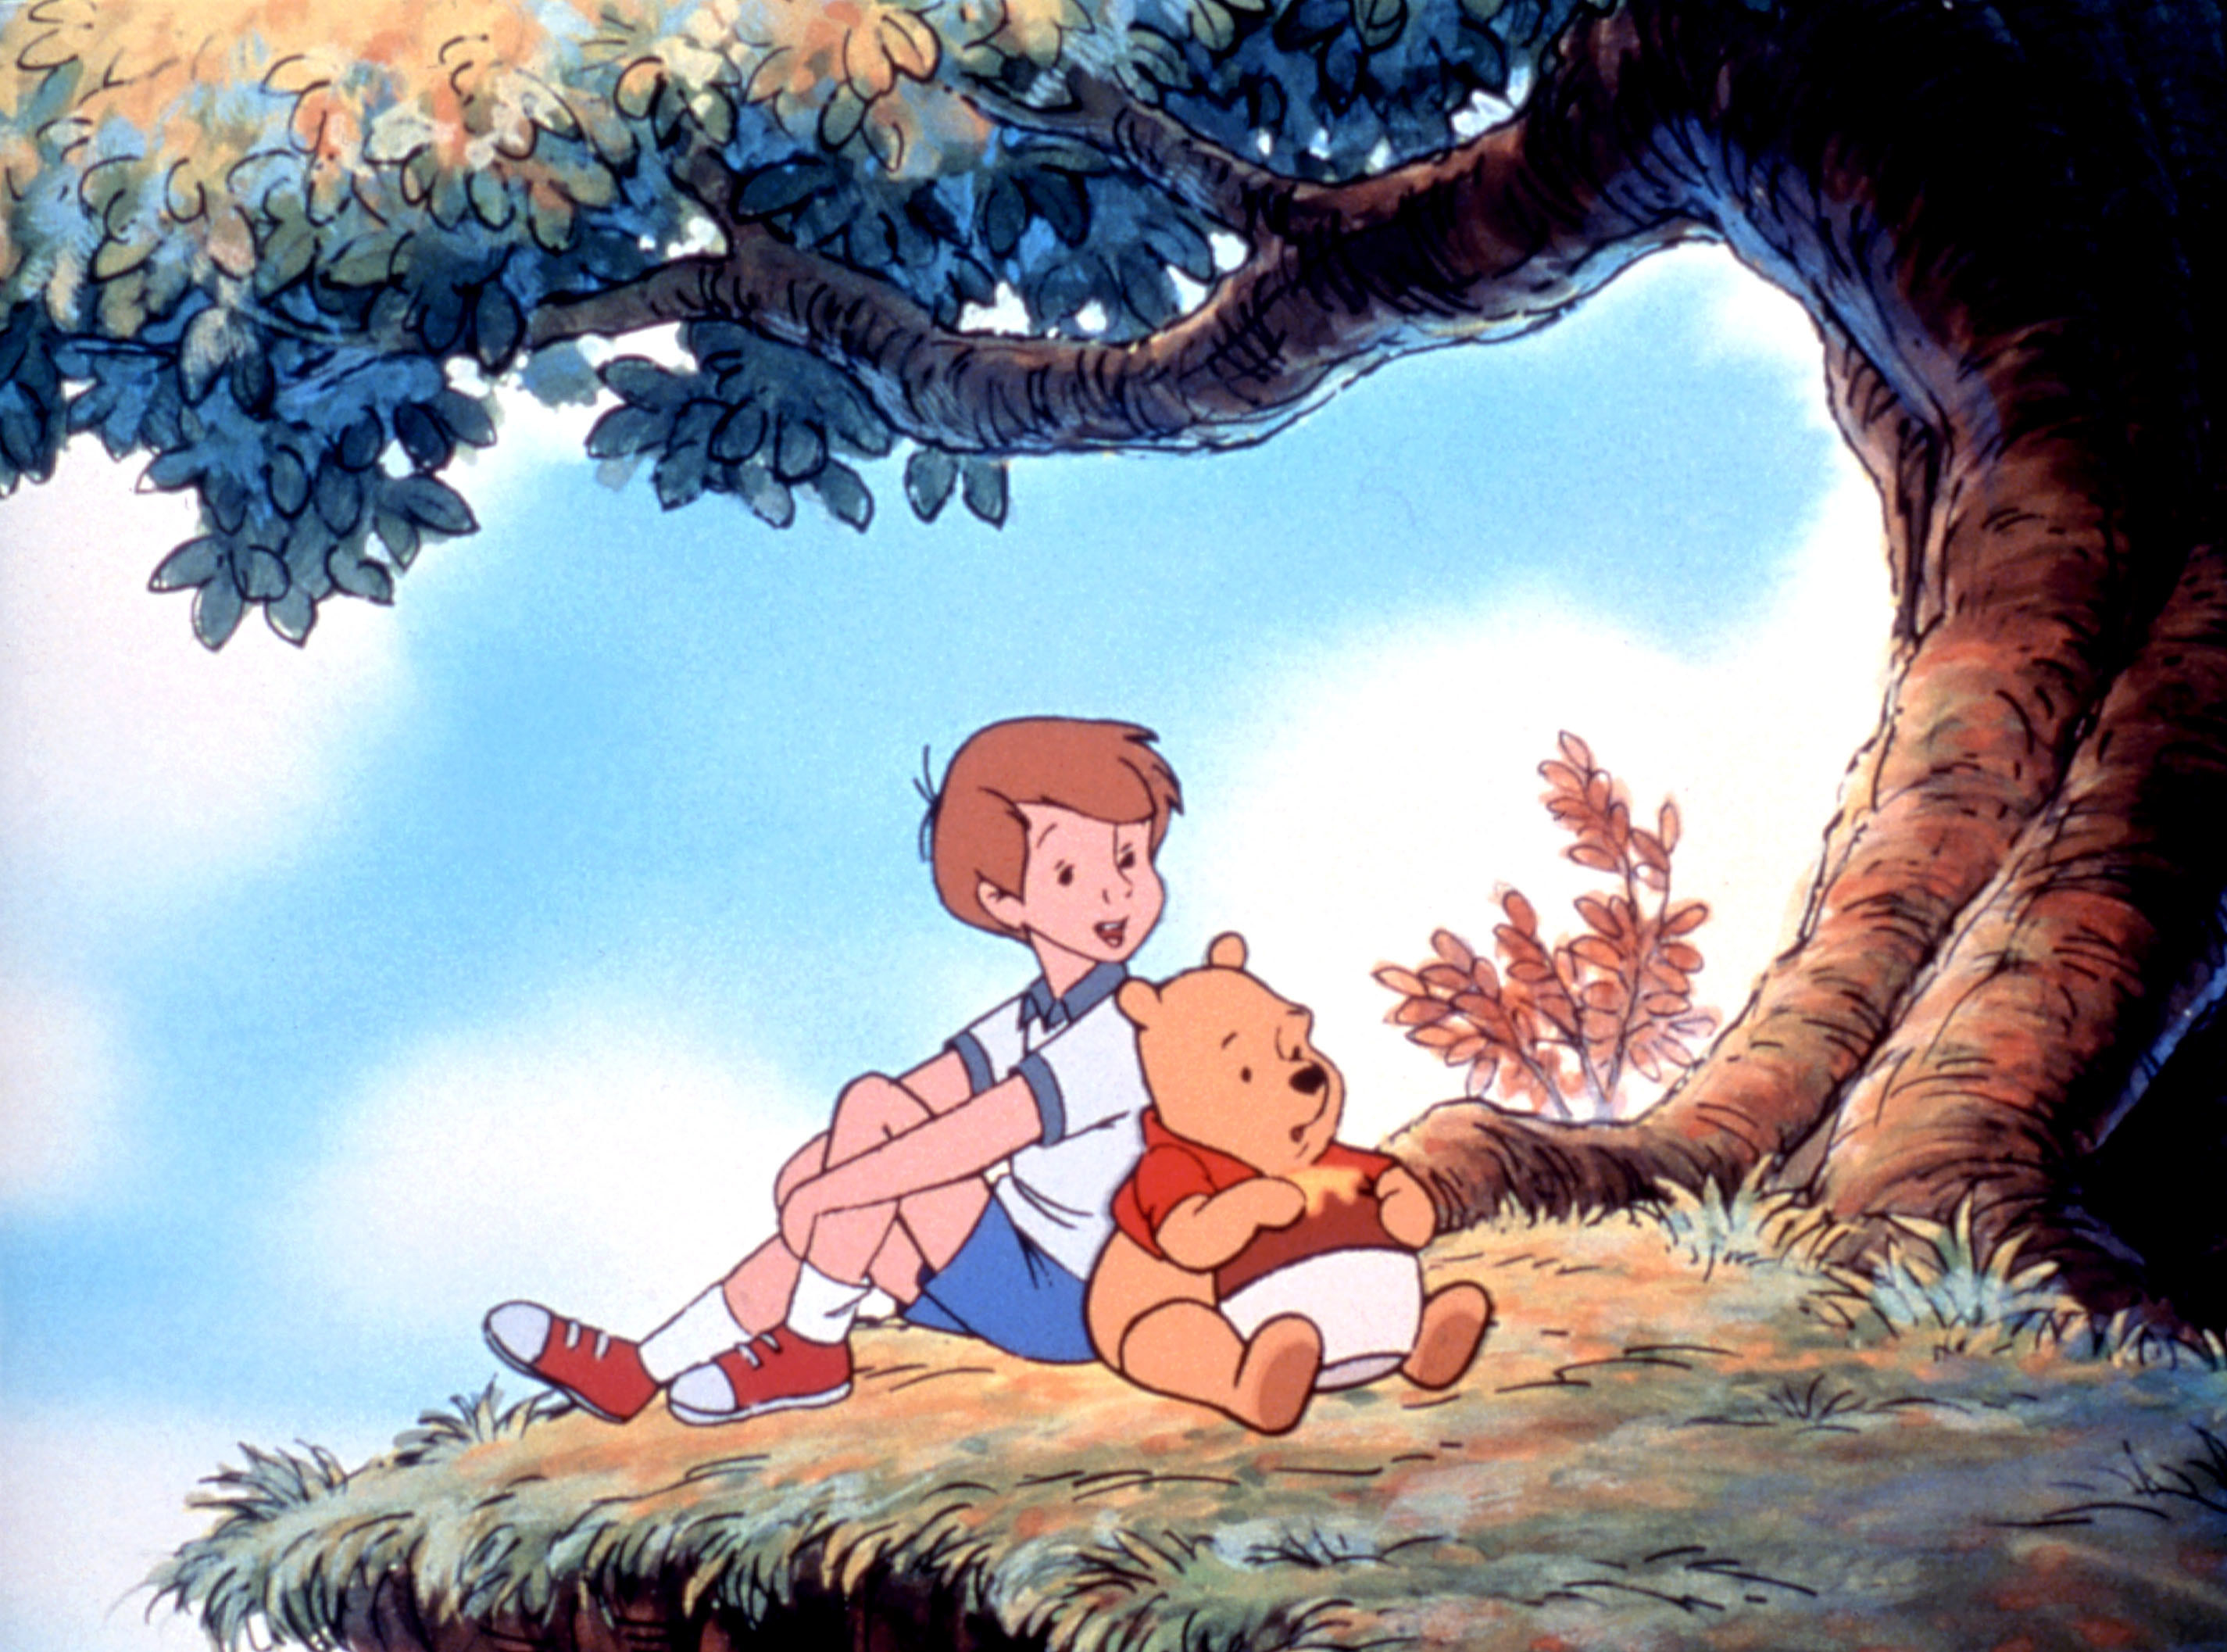 Christopher Robin and Pooh in The New Adventures of Winnie the Pooh